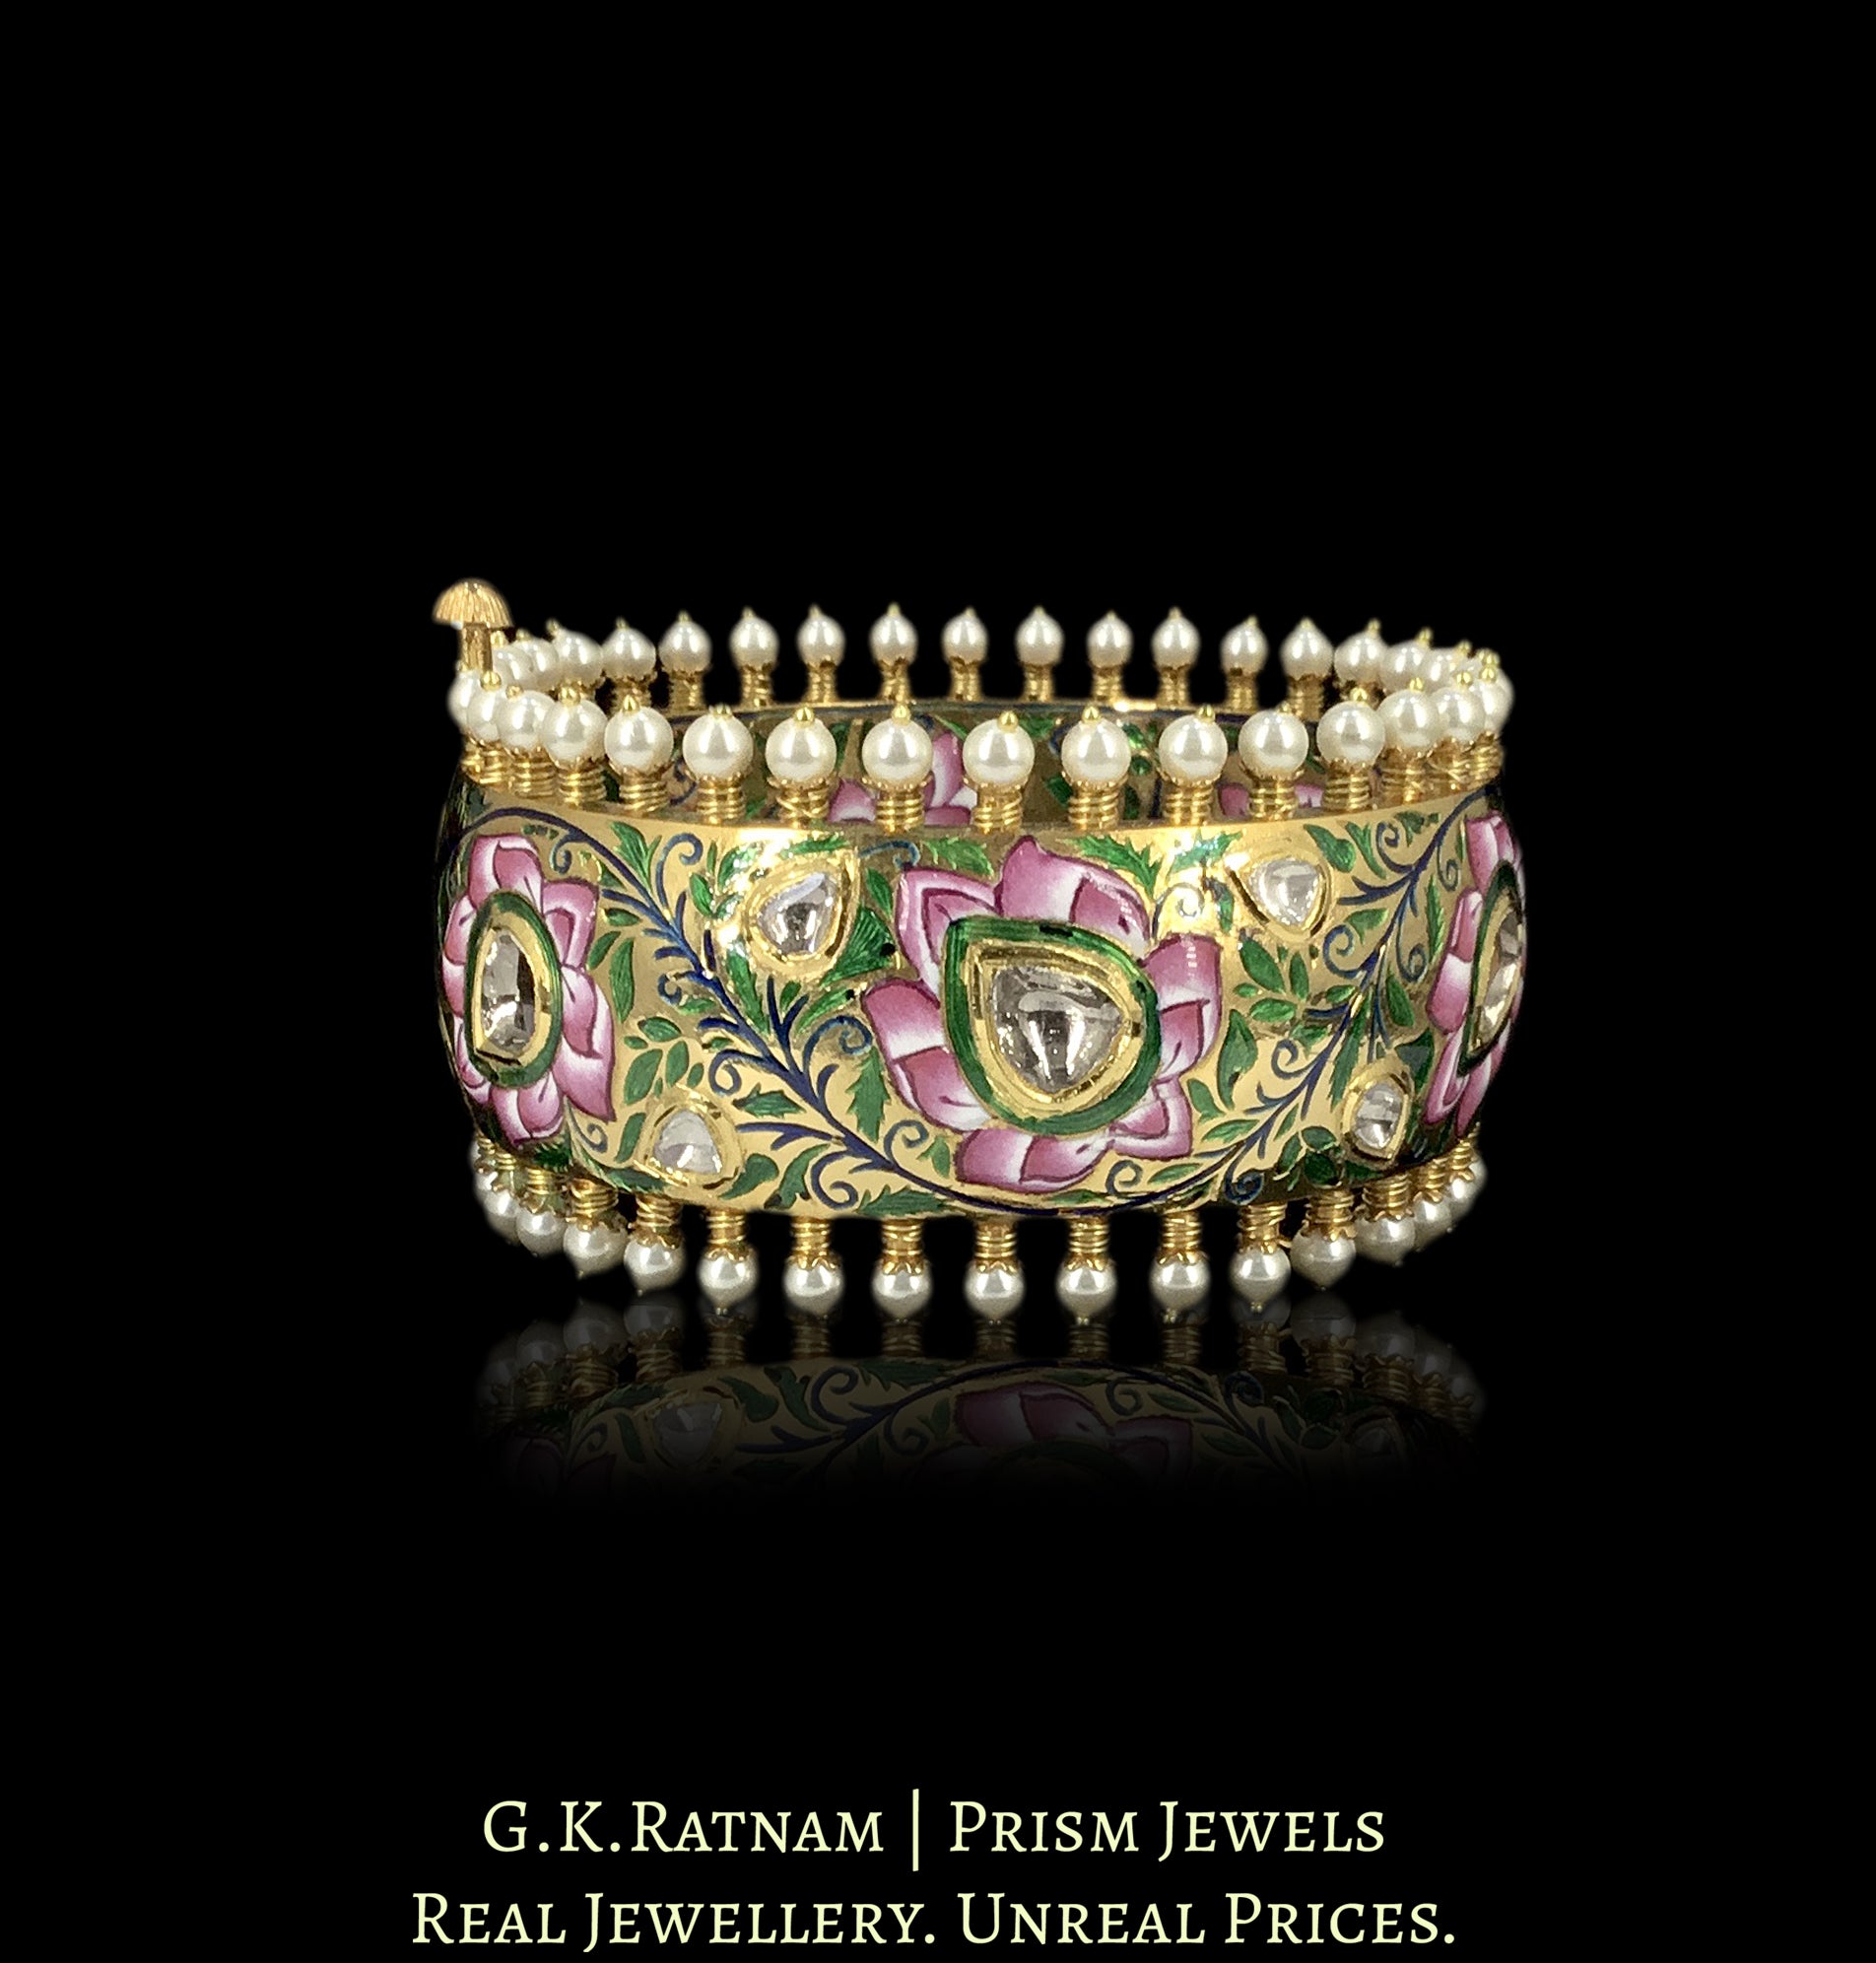 22k Gold and Diamond Polki Broad Bangle with intricate enamelling